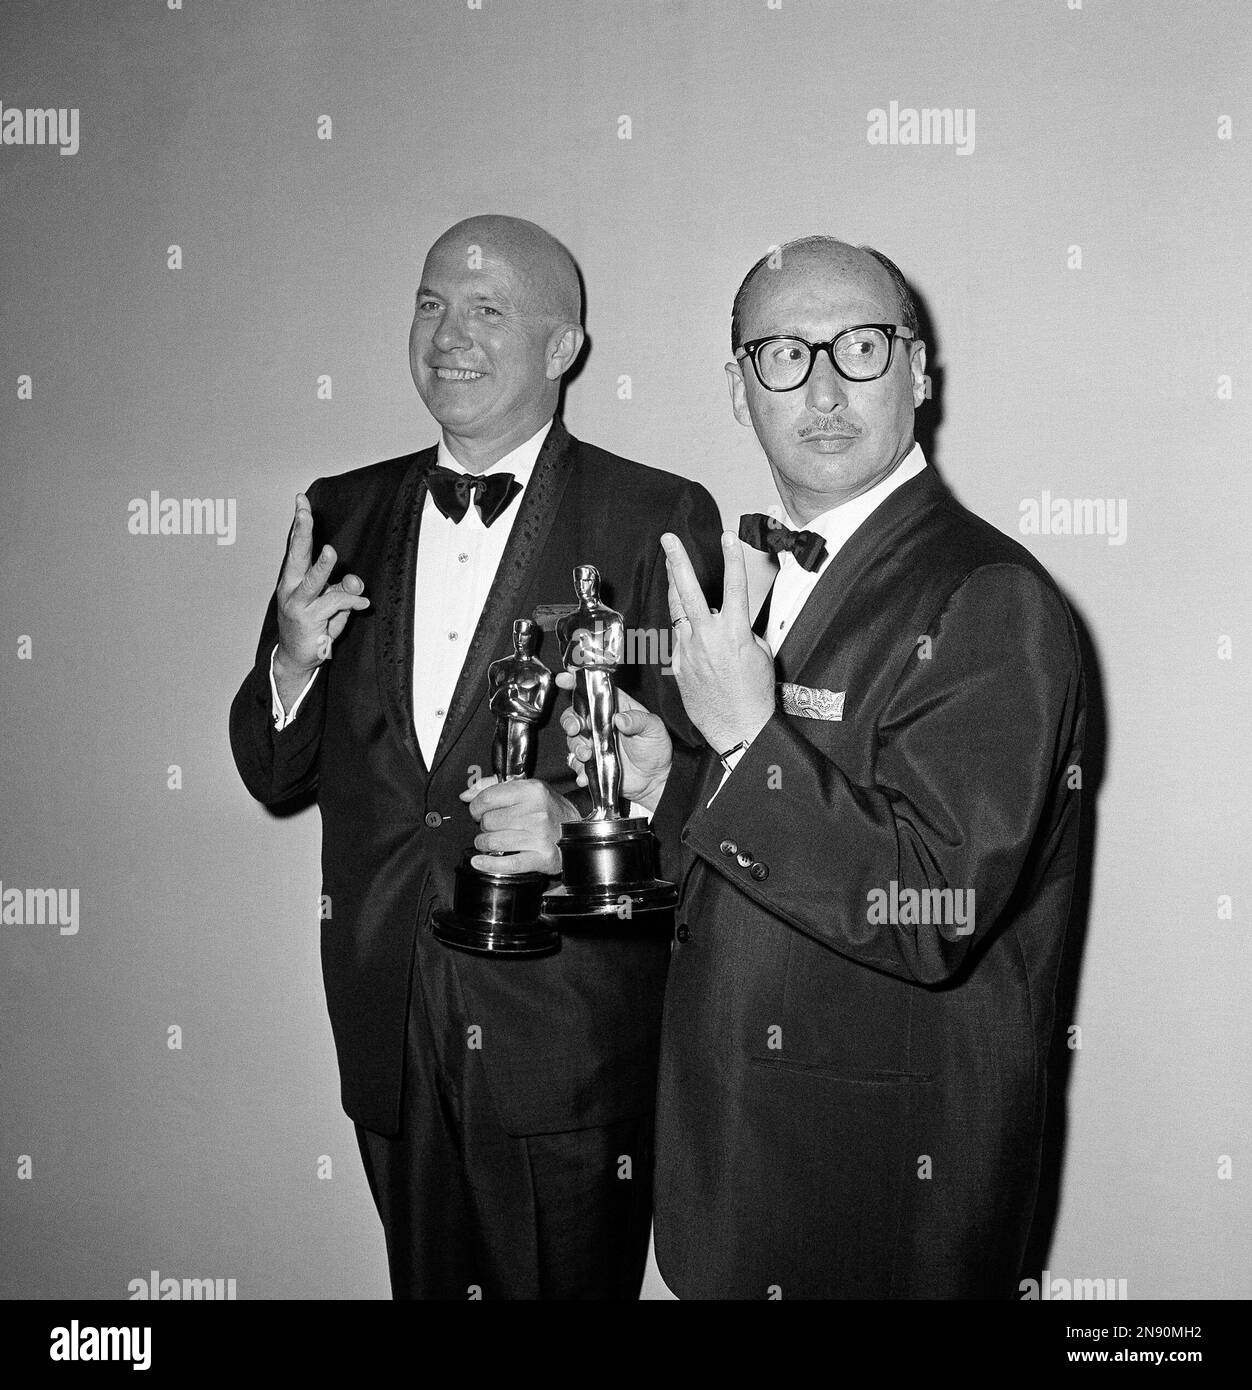 https://c8.alamy.com/comp/2N90MH2/jimmy-van-heusen-left-and-sammy-cahn-hold-oscars-won-for-the-best-song-high-hopes-at-the-academy-presentations-in-hollywood-calif-on-april-4-1960-ap-photo-2N90MH2.jpg